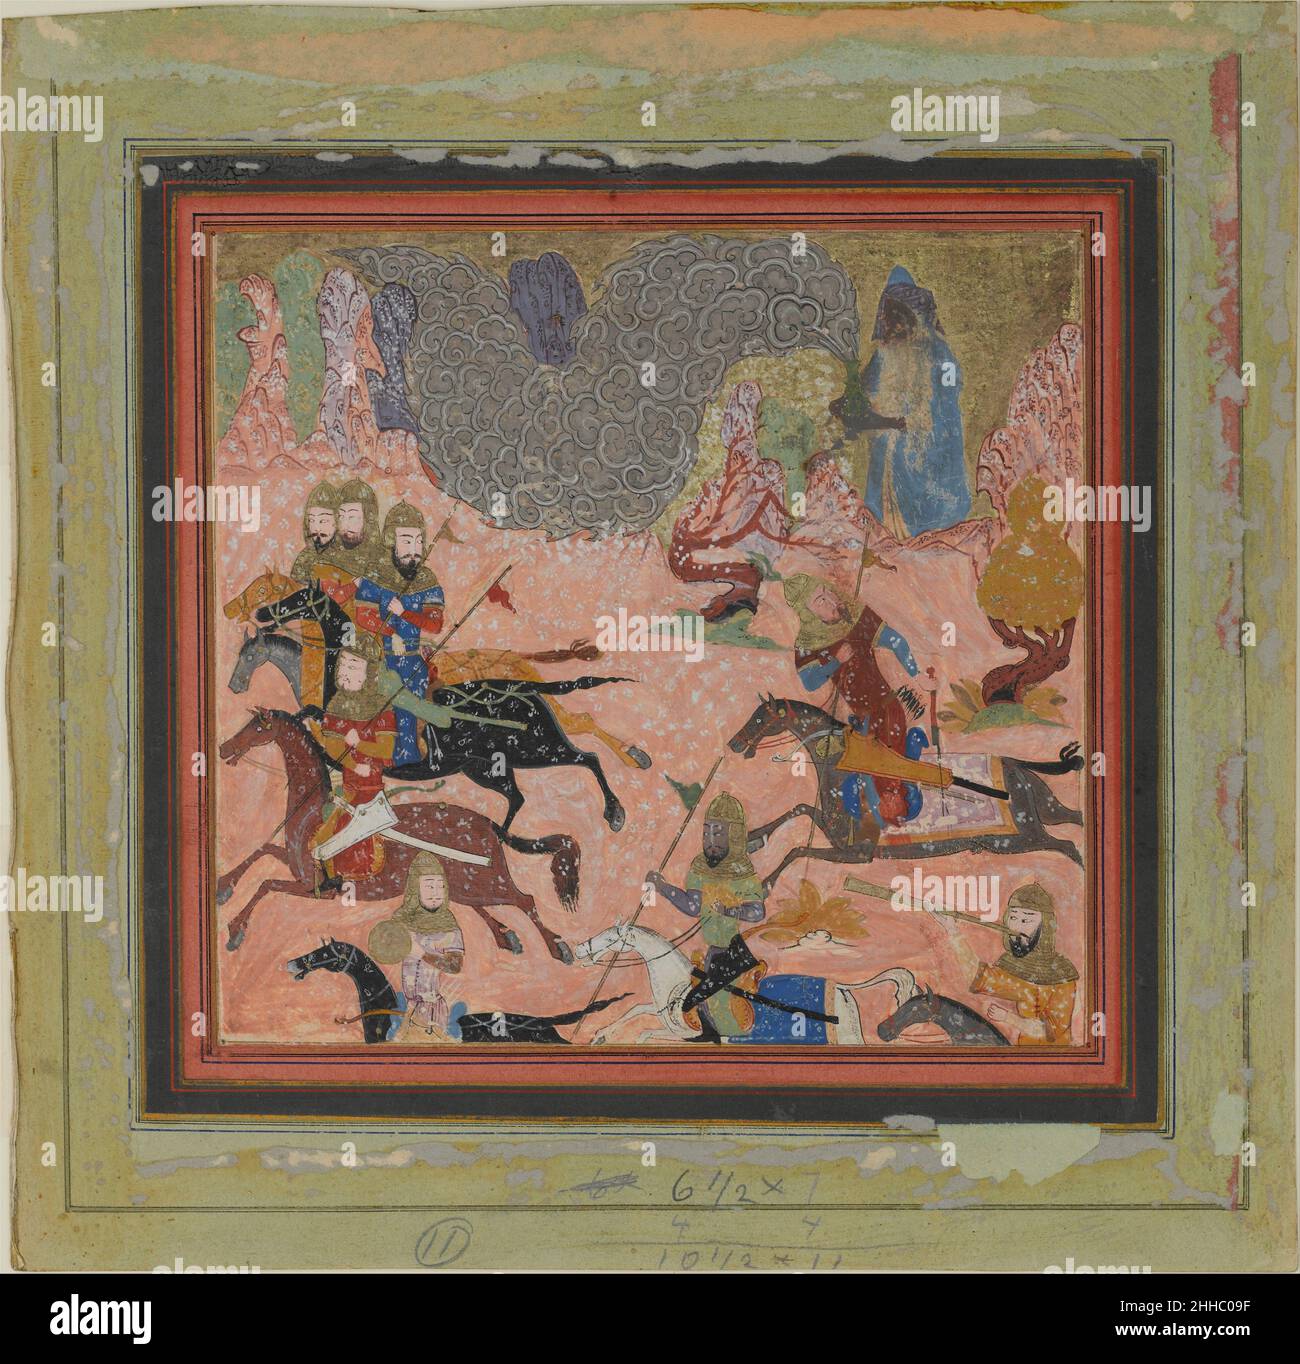 'Bazur, the Magician, Raises up Darkness and a Storm', Folio from a Shahnama (Book of Kings) ca. 1430–40 Abu'l Qasim Firdausi During a battle between the Iranians and the Turanians, a sorcerer named Bazur (shown here in a blue cape) climbs to the top of a mountain and creates a blizzard that engulfs the Iranian forces. In the ensuing confusion, the Turanians attack, causing heavy casualties.This painting comes from a copy of the highly Persianate Shahnama that was probably made in northern India. The paintings from this book were later cut out and placed in an album with brightly colored borde Stock Photo